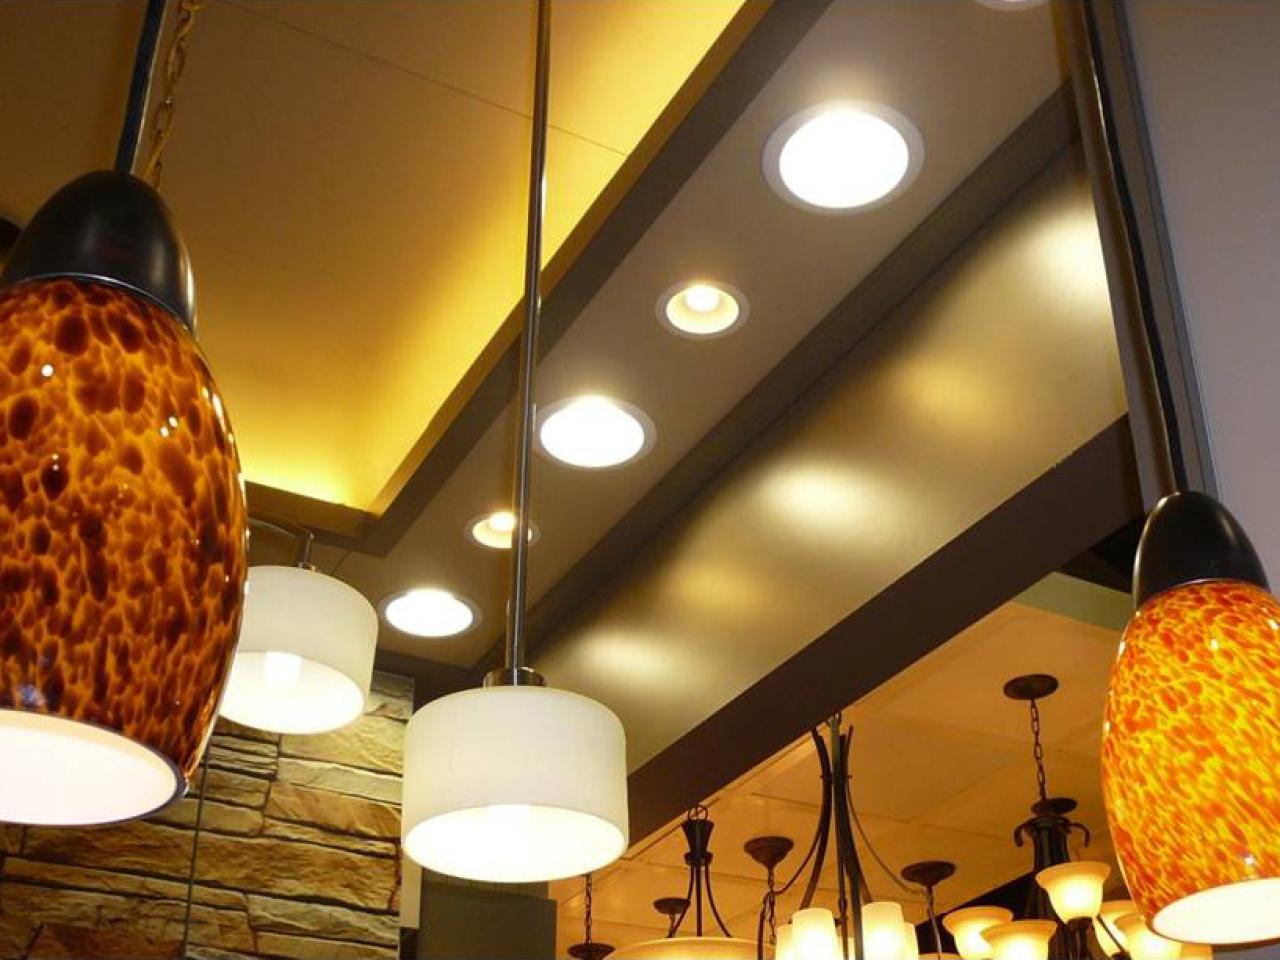 10 Things To Consider When Choosing New Lighting For Your House